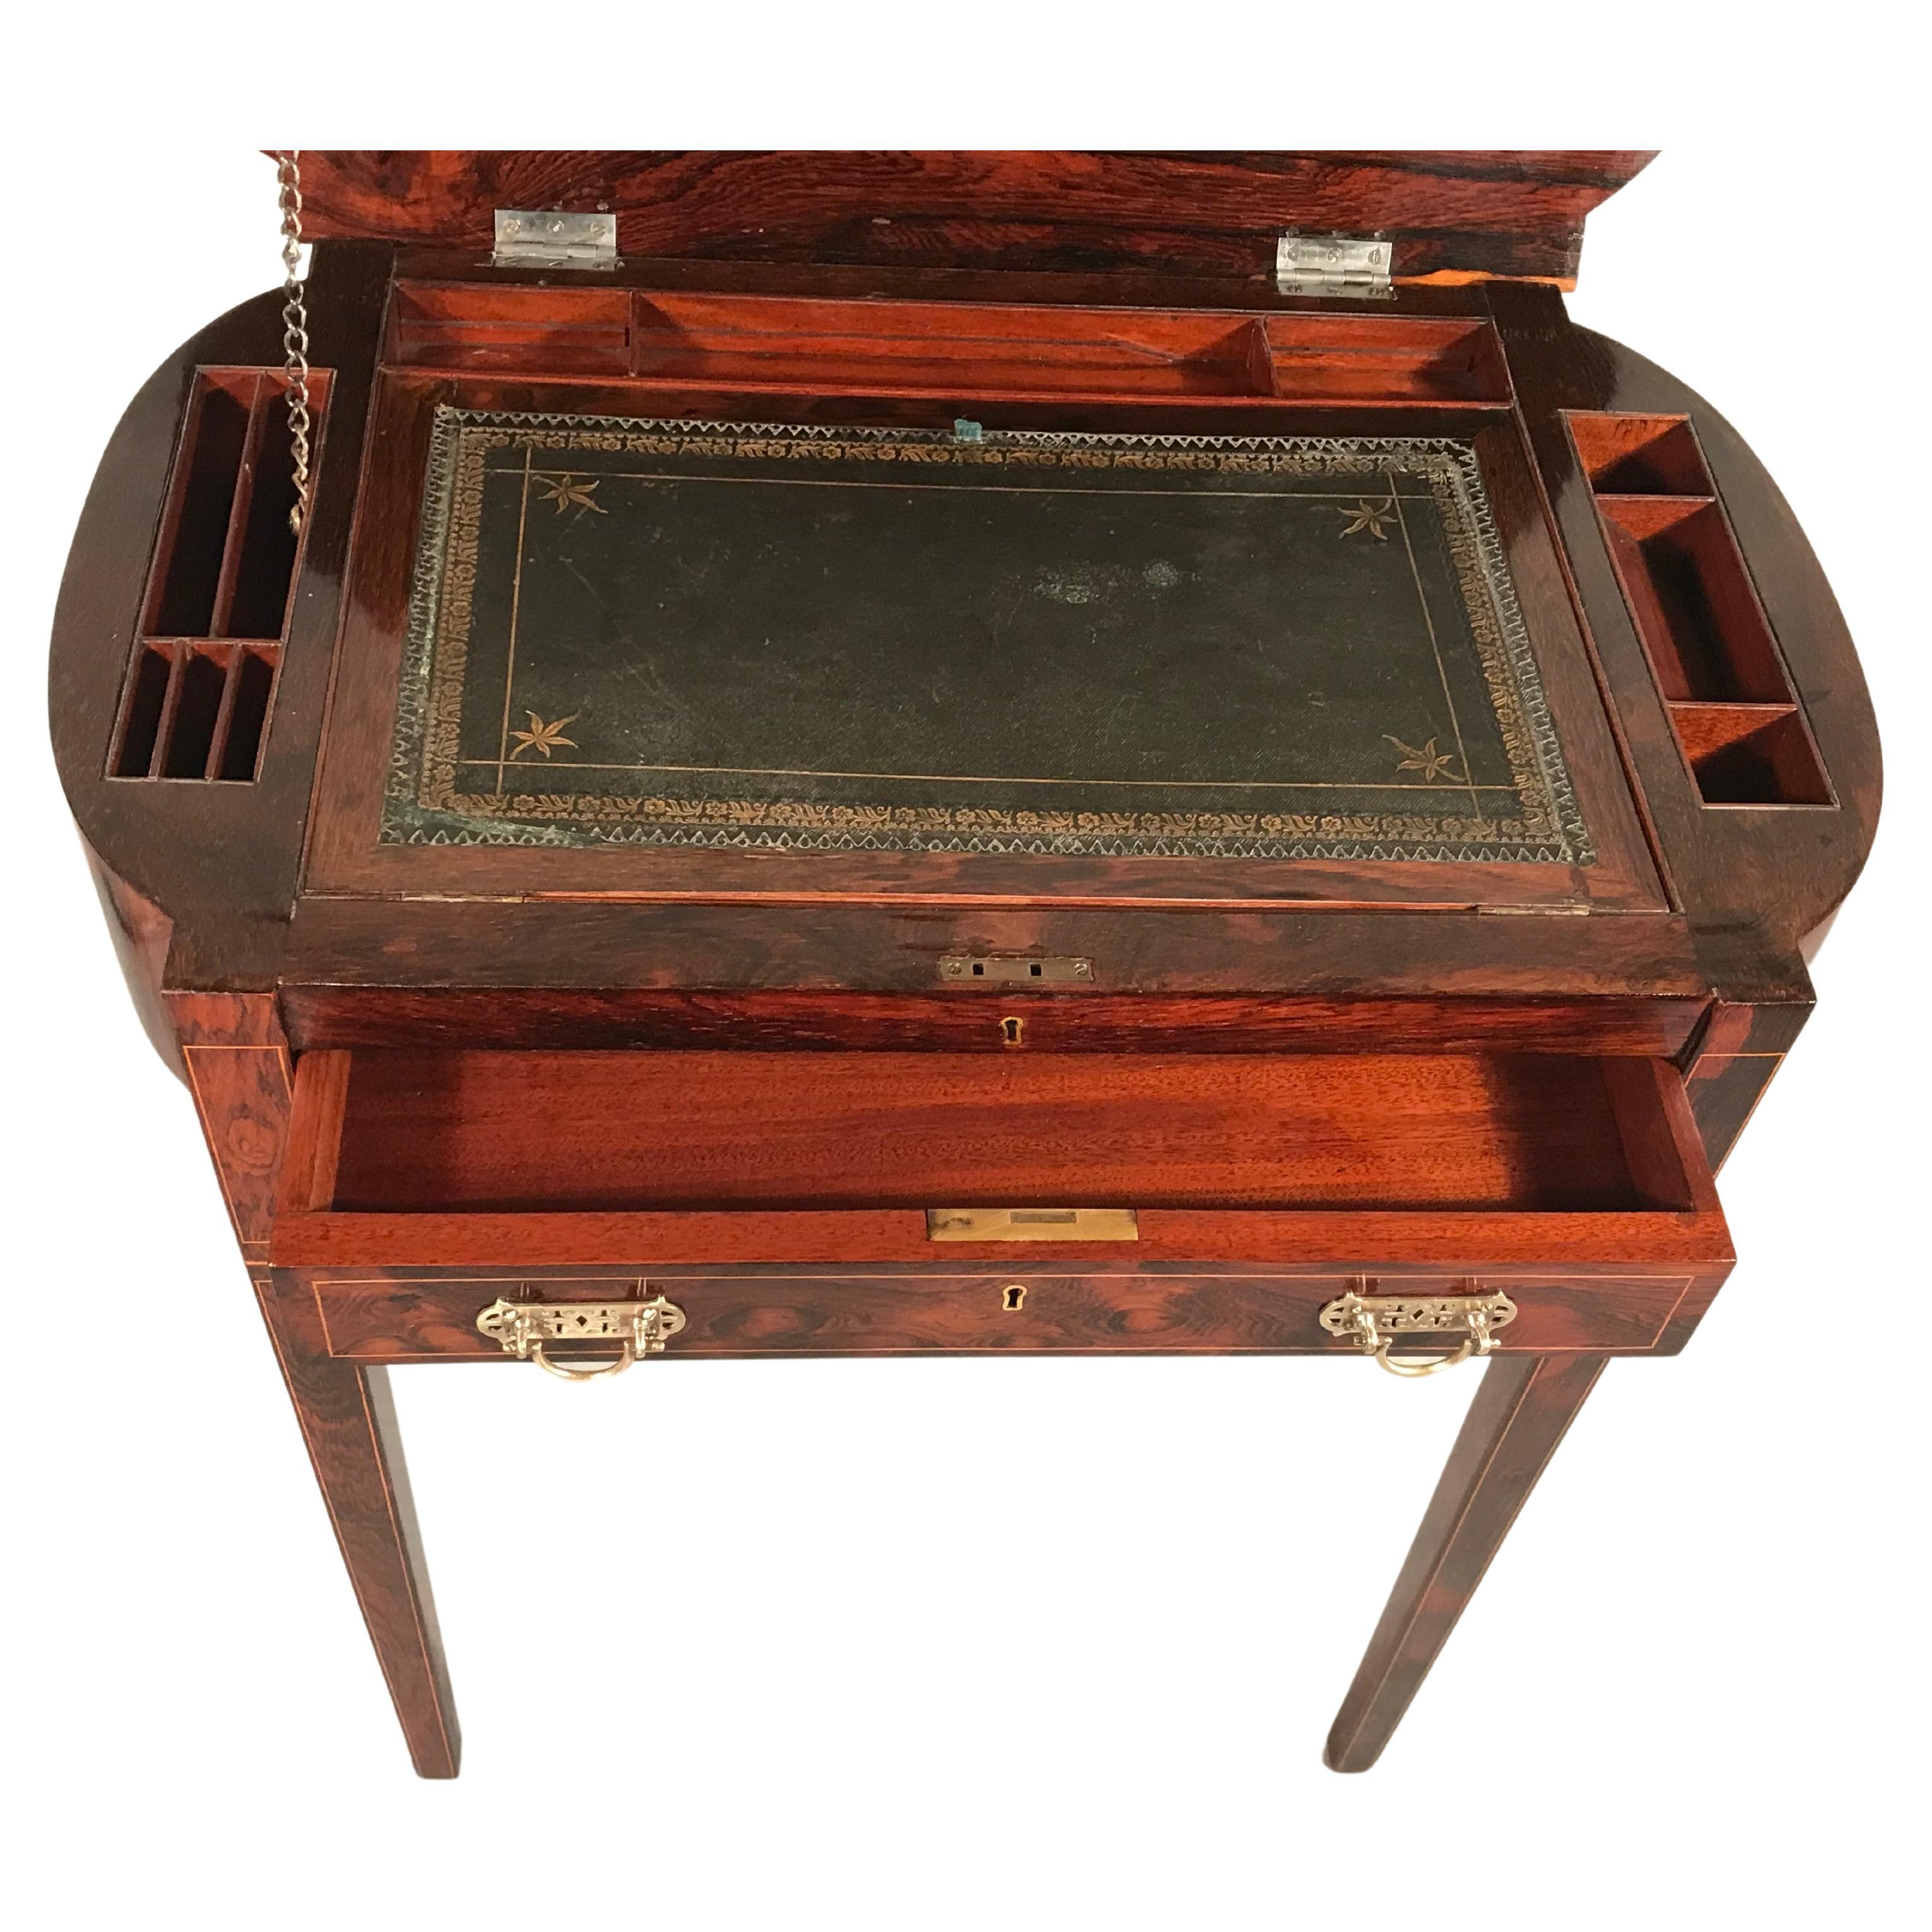 This beautiful small lady's desk comes from England and was made during the Regency period around 1830. The desk features a pretty kingwood veneer on the outside. It has a flip up top which reveals a writing surface surrounded by small compartments